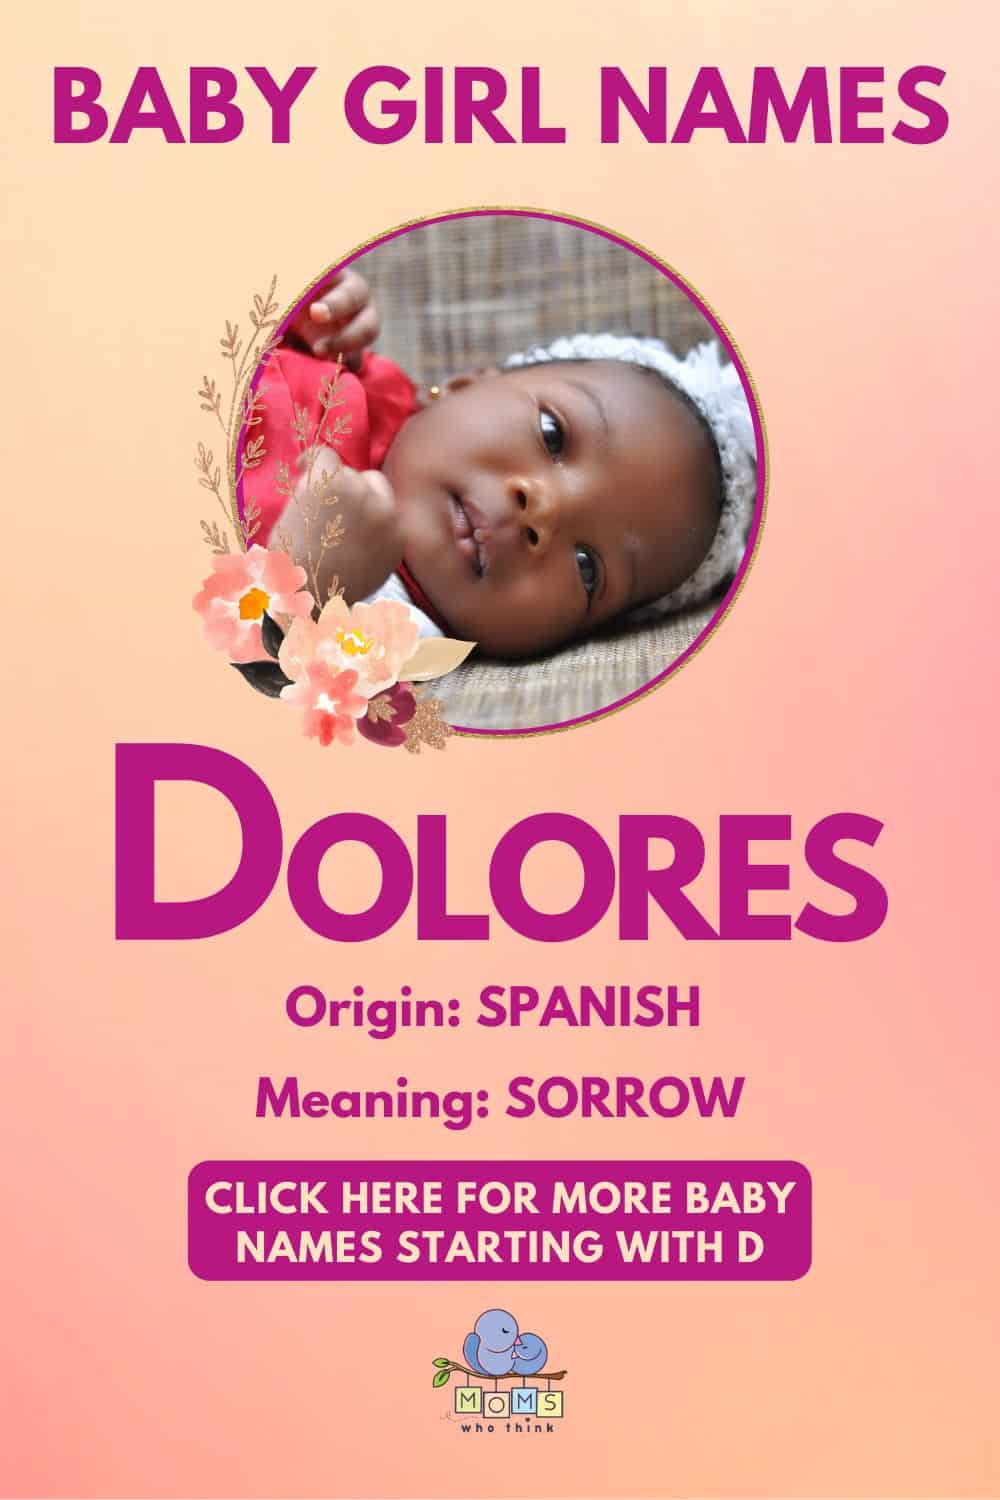 Baby girl name meanings - Dolores